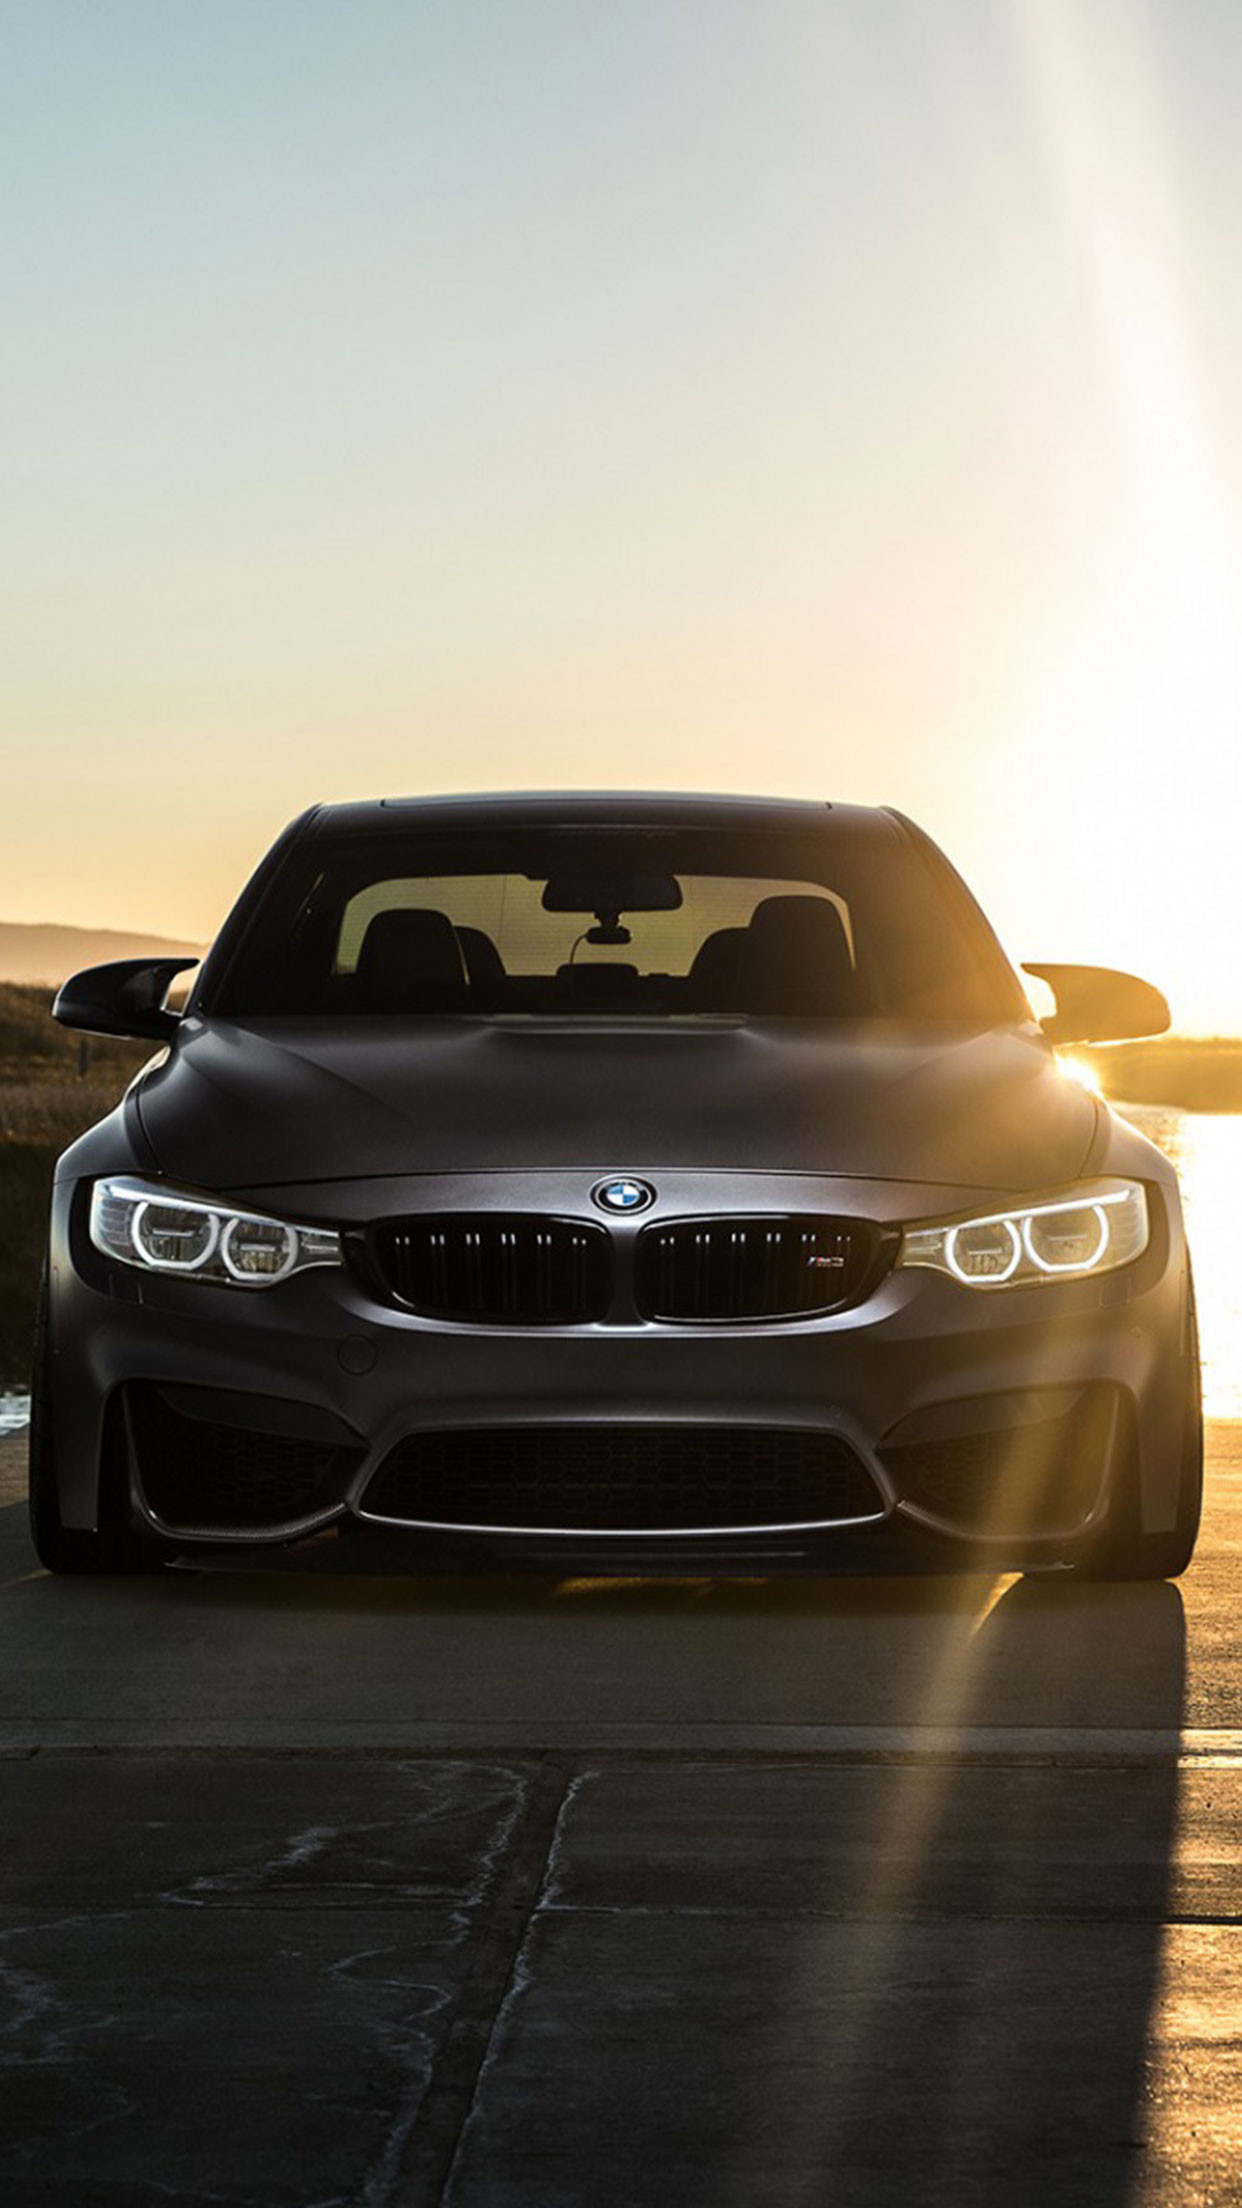 1242x2208 Grey BMW car wallpaper for #Iphone and #Android #BMW #Car at wallzapp